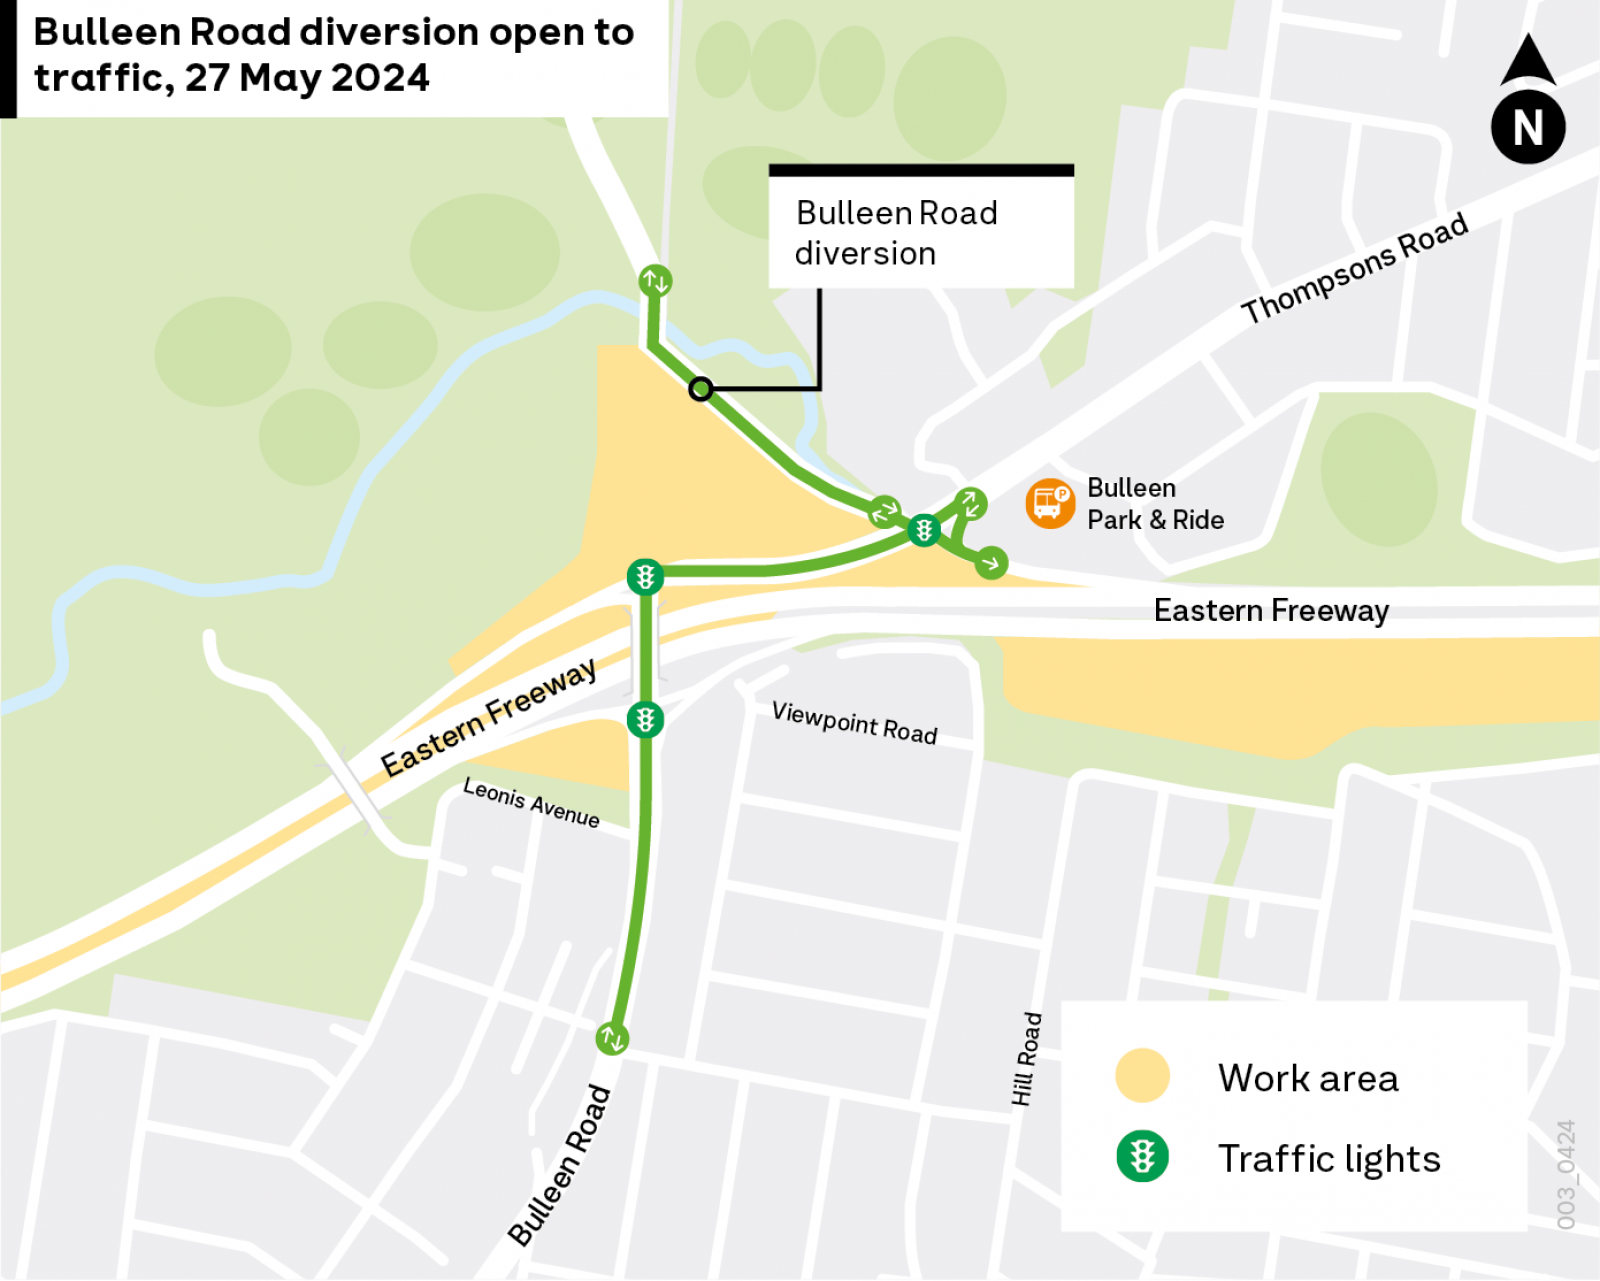 Bulleen Road diversion open to traffic 27 May 2024